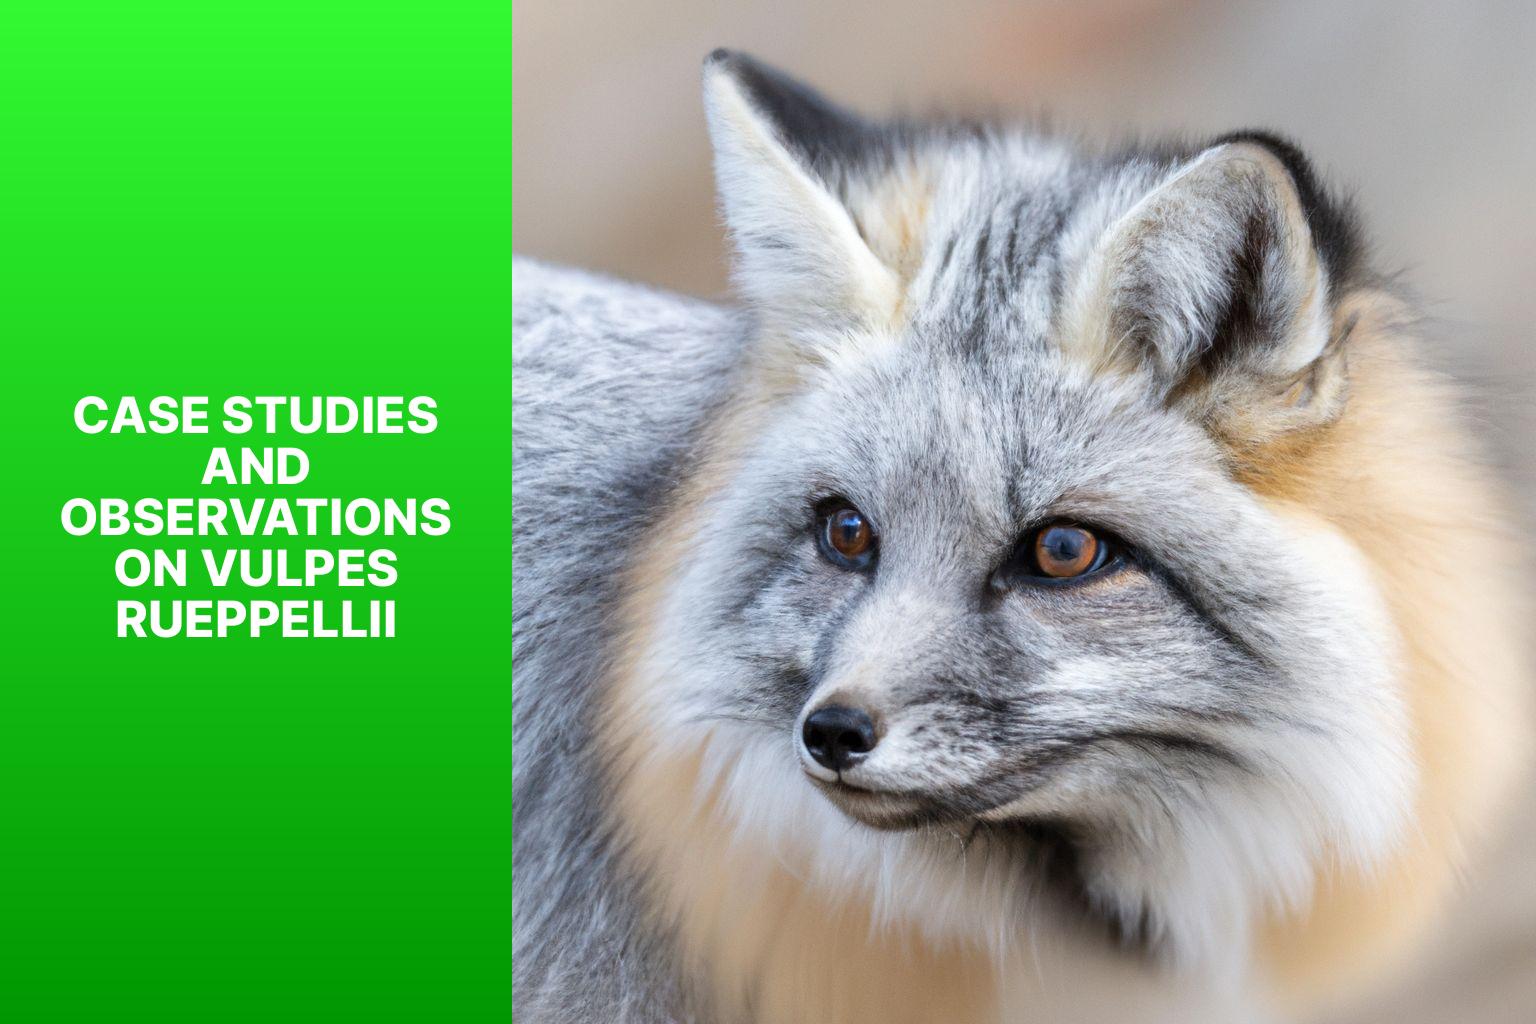 Case Studies and Observations on Vulpes rueppellii - Vulpes rueppellii in Scientific Journals 